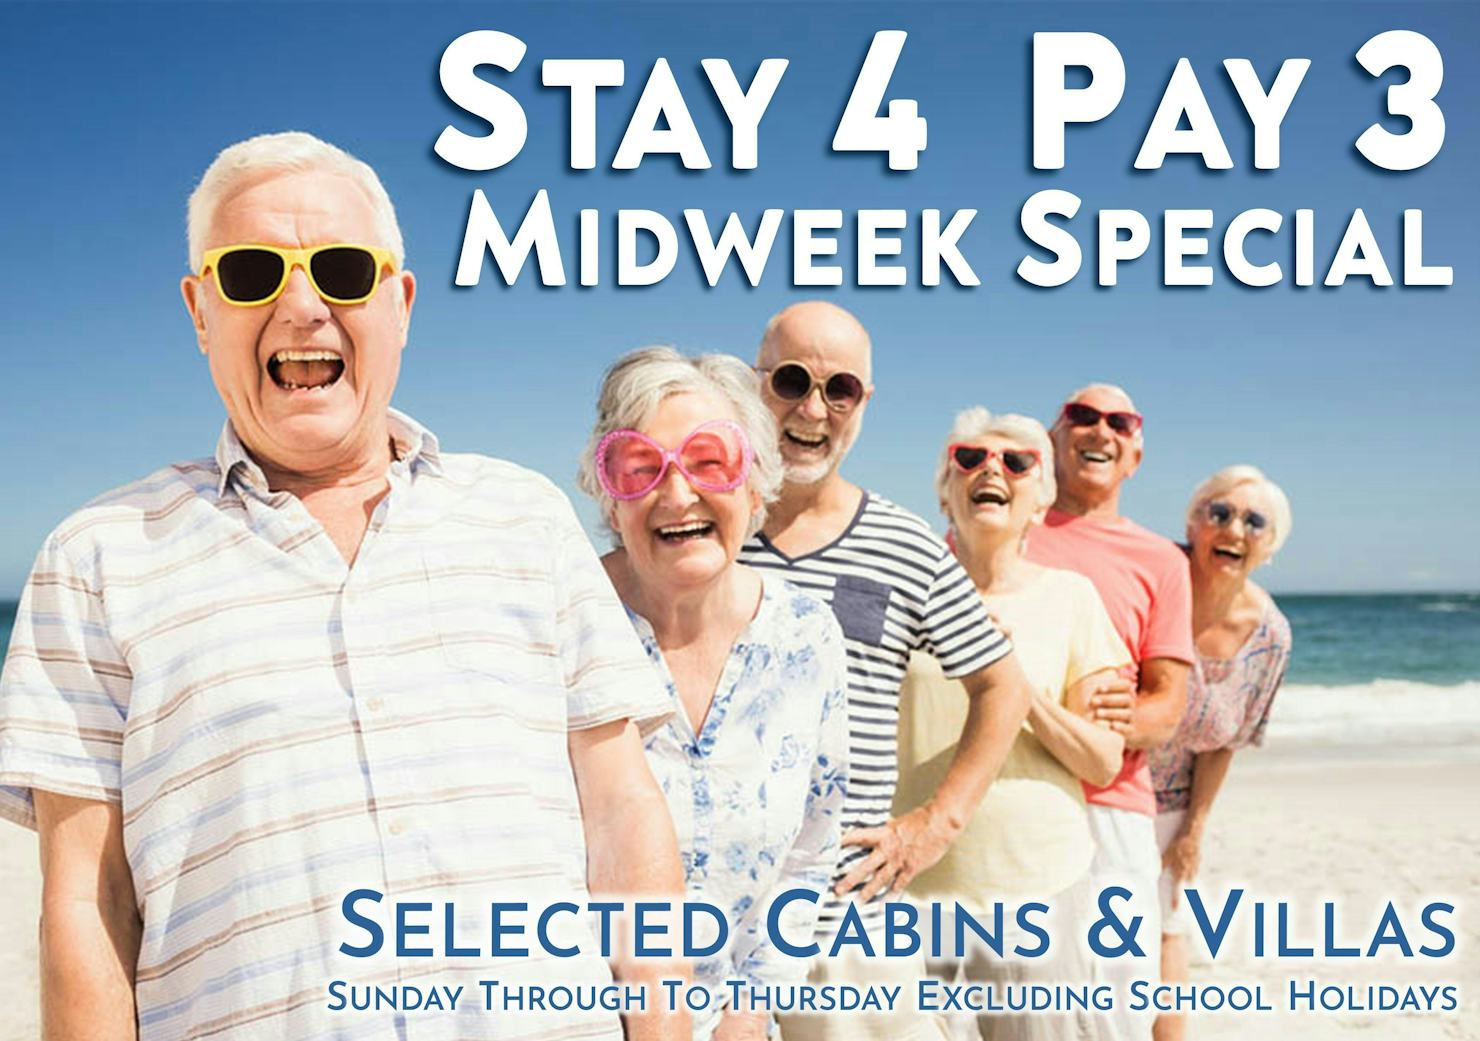 Stay 4 Pay 3 Midweek Special